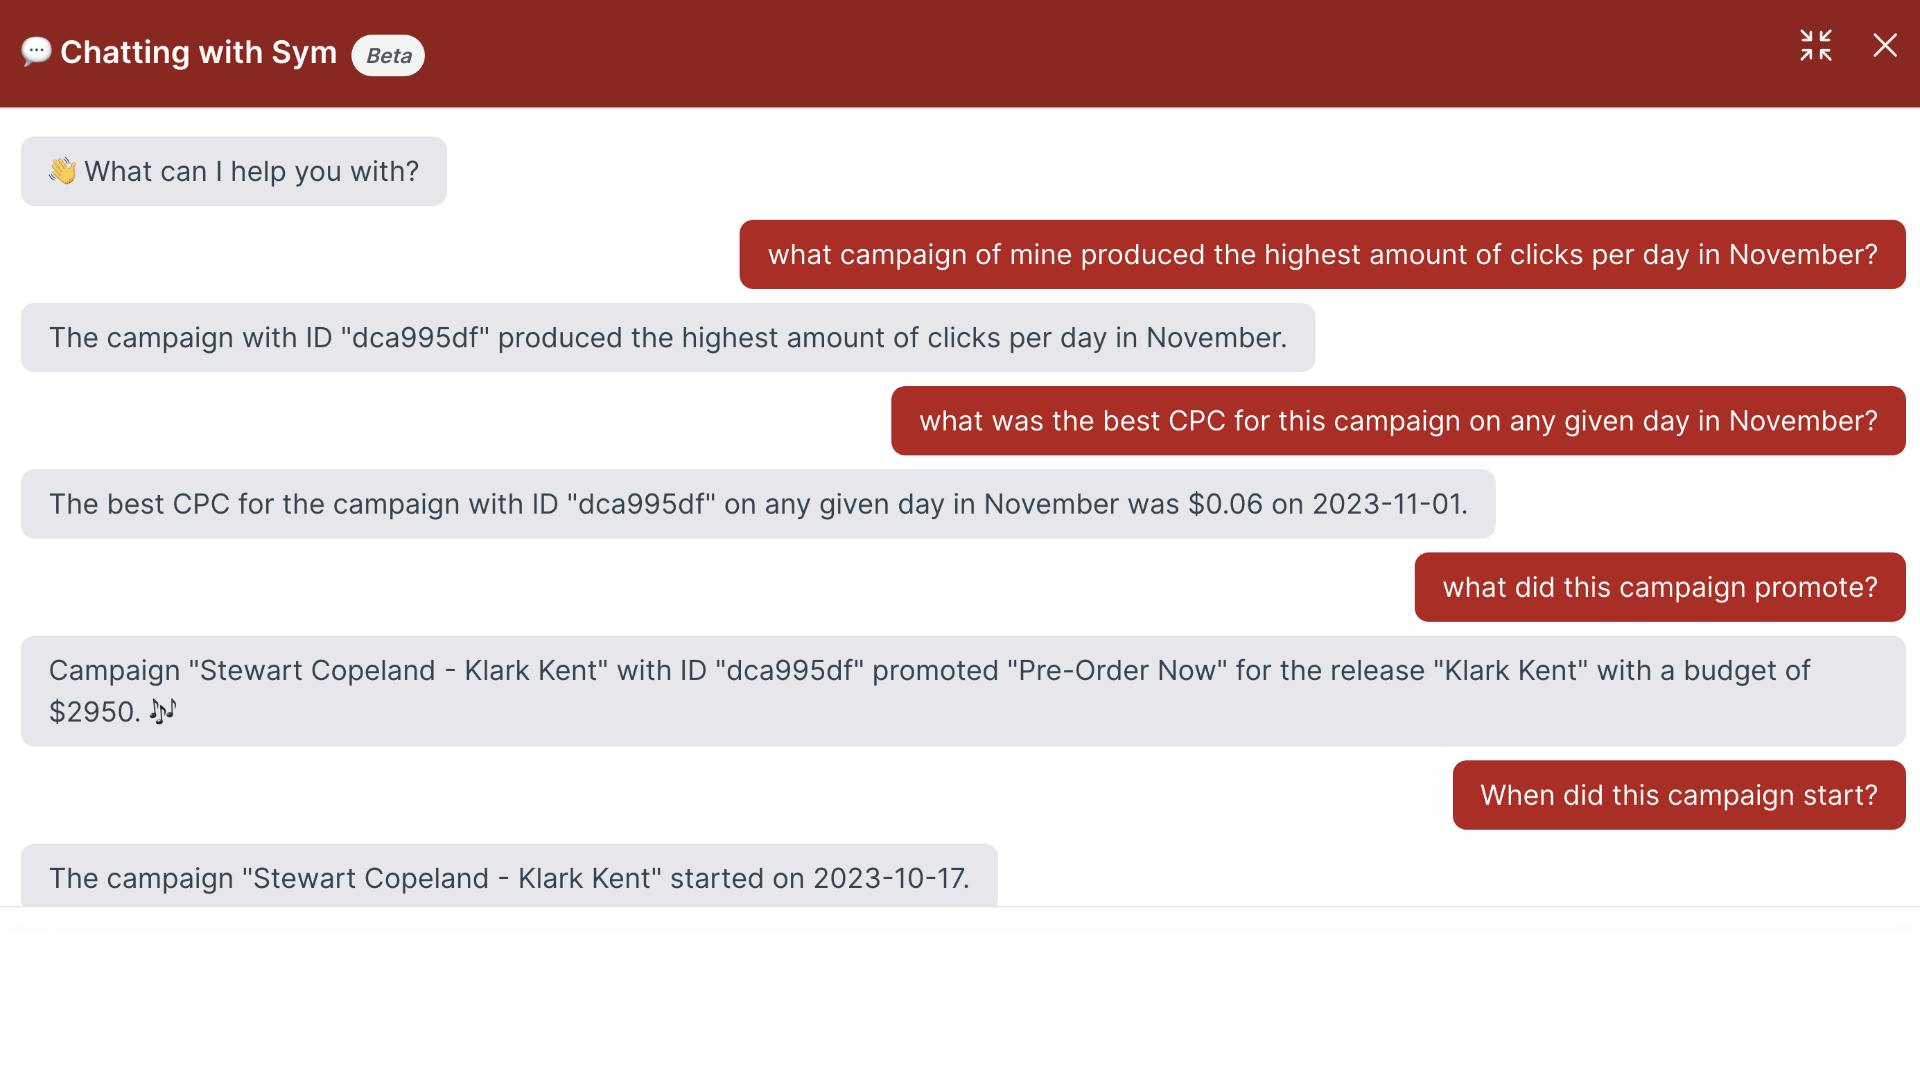 An example conversation with b00st.com chat about the best performing advertsing campaign in November, which ended up being Stewart Copeland's 'Klark Kent' pre-order.